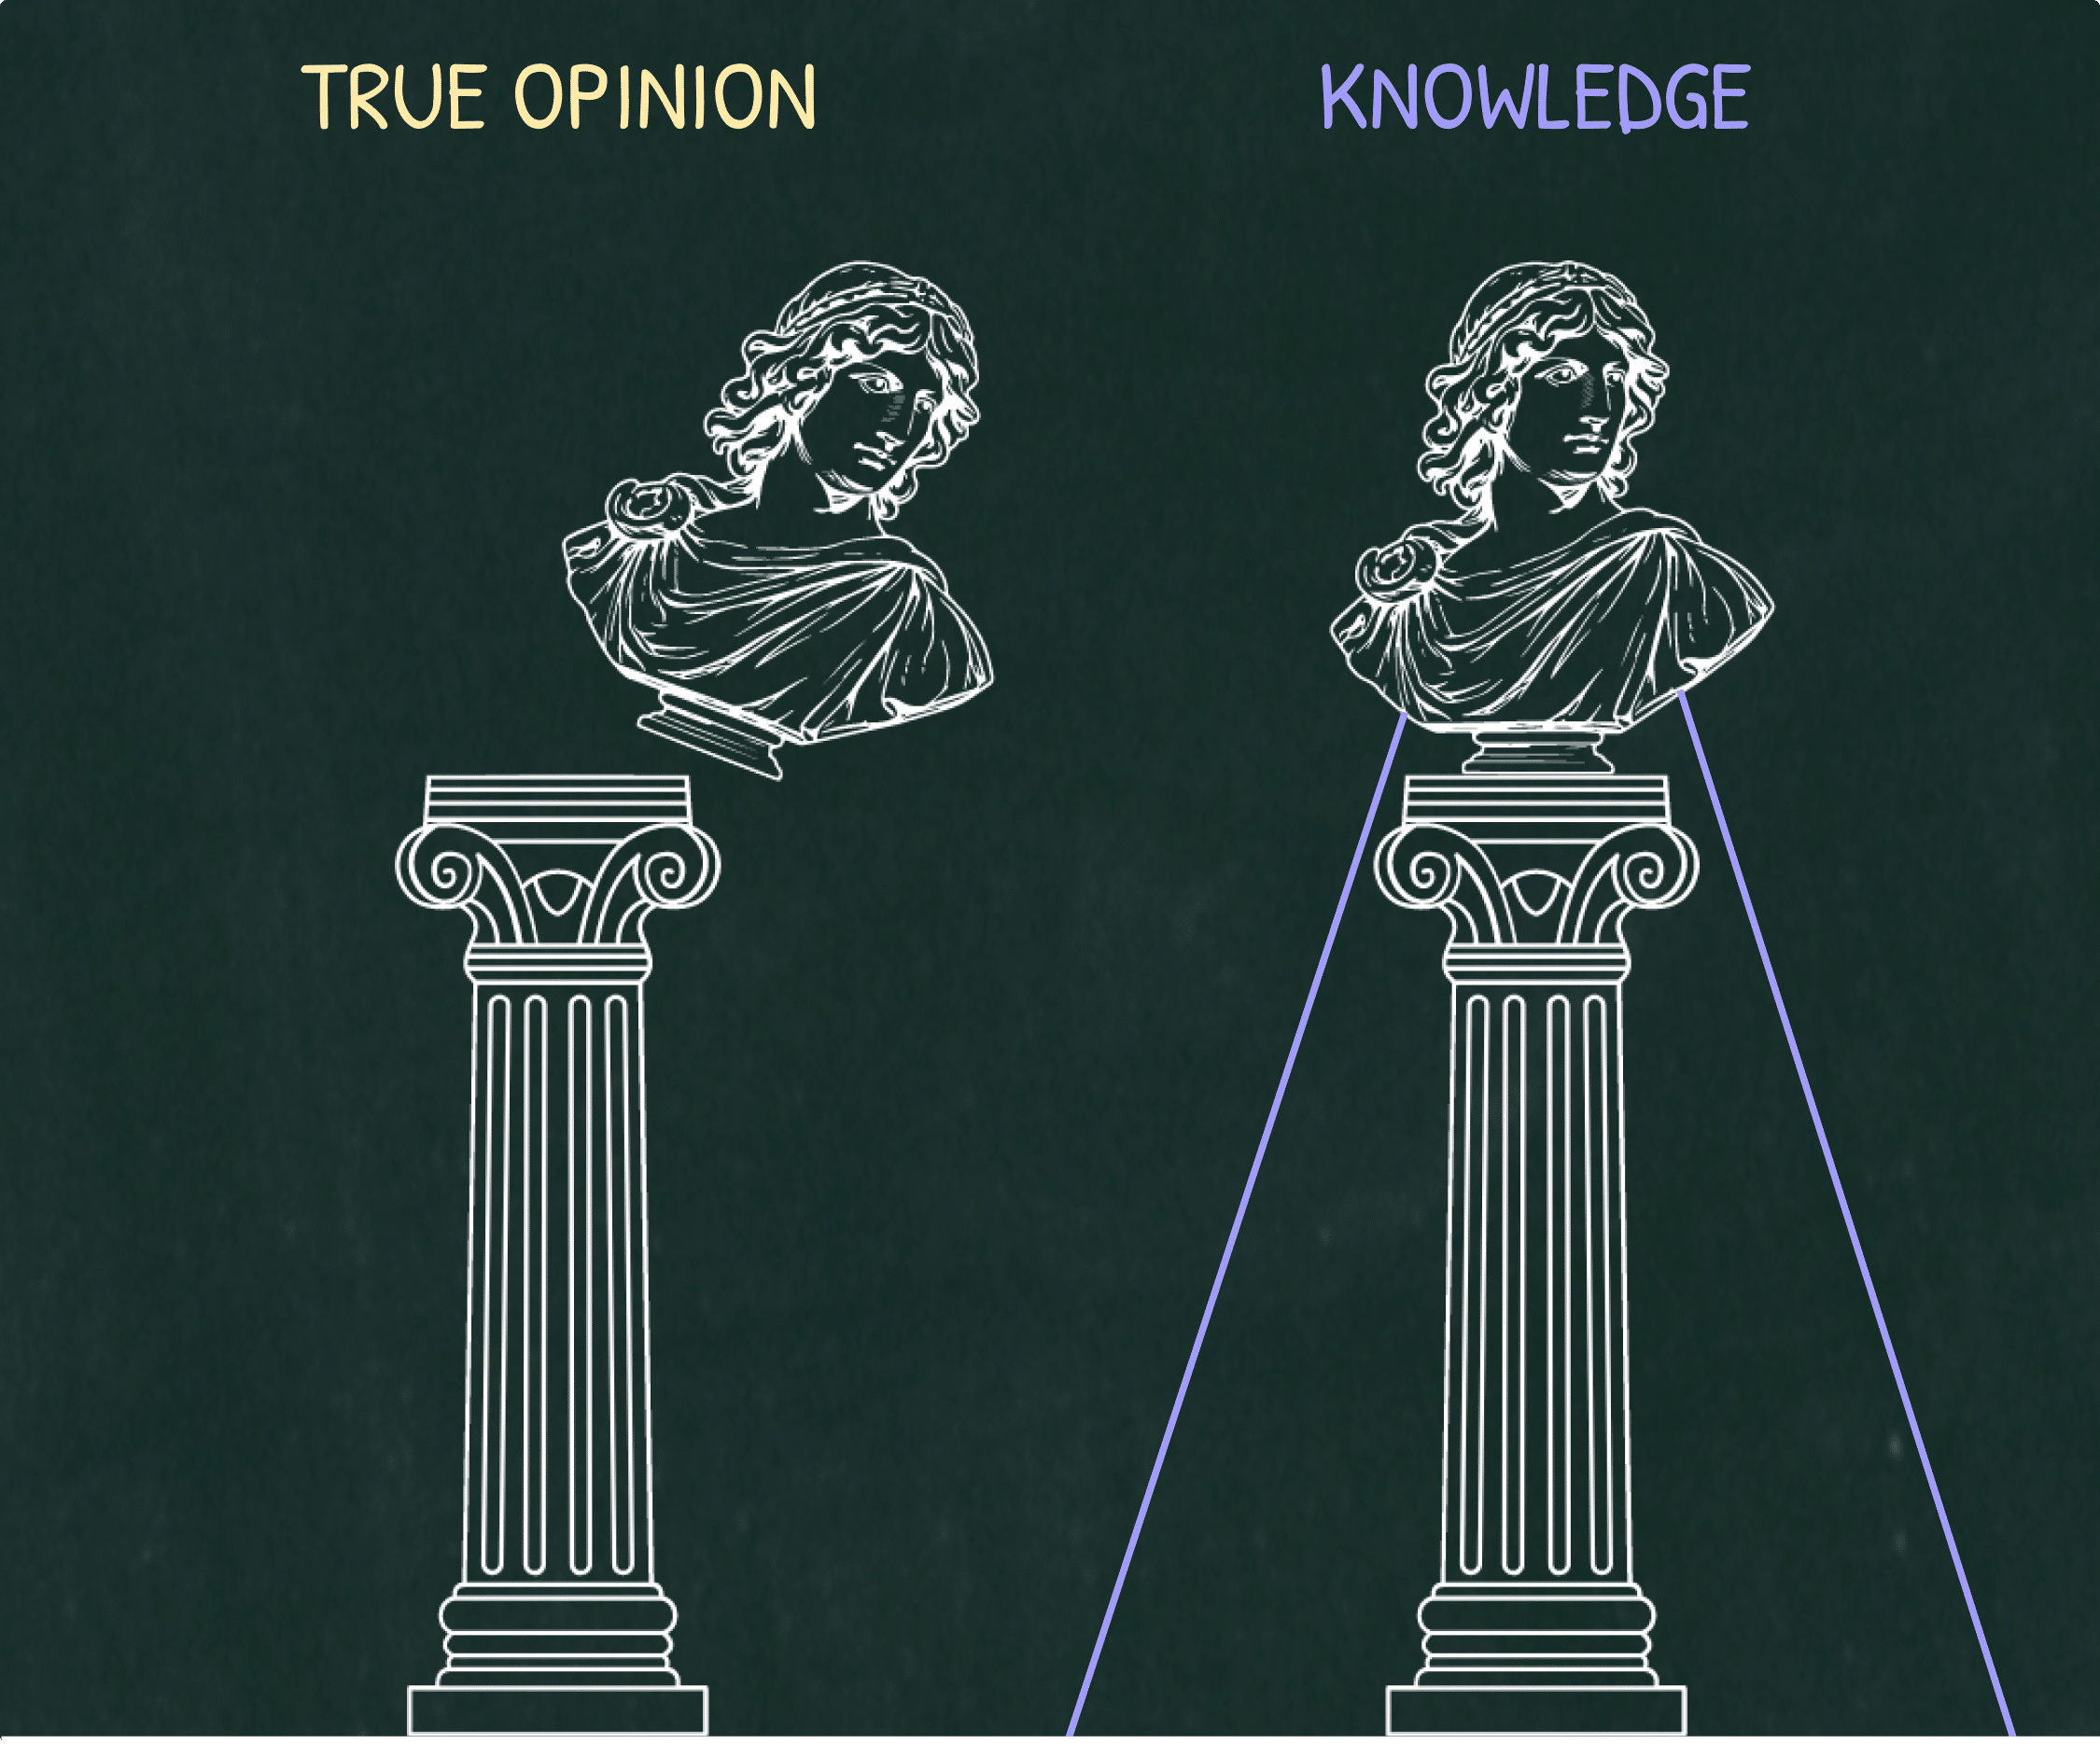 An illustration of two statues comparing true opinion to knowledge. With true opinion the statue is unstable, with knowledge, the statue is stable and cannot be knocked over. 